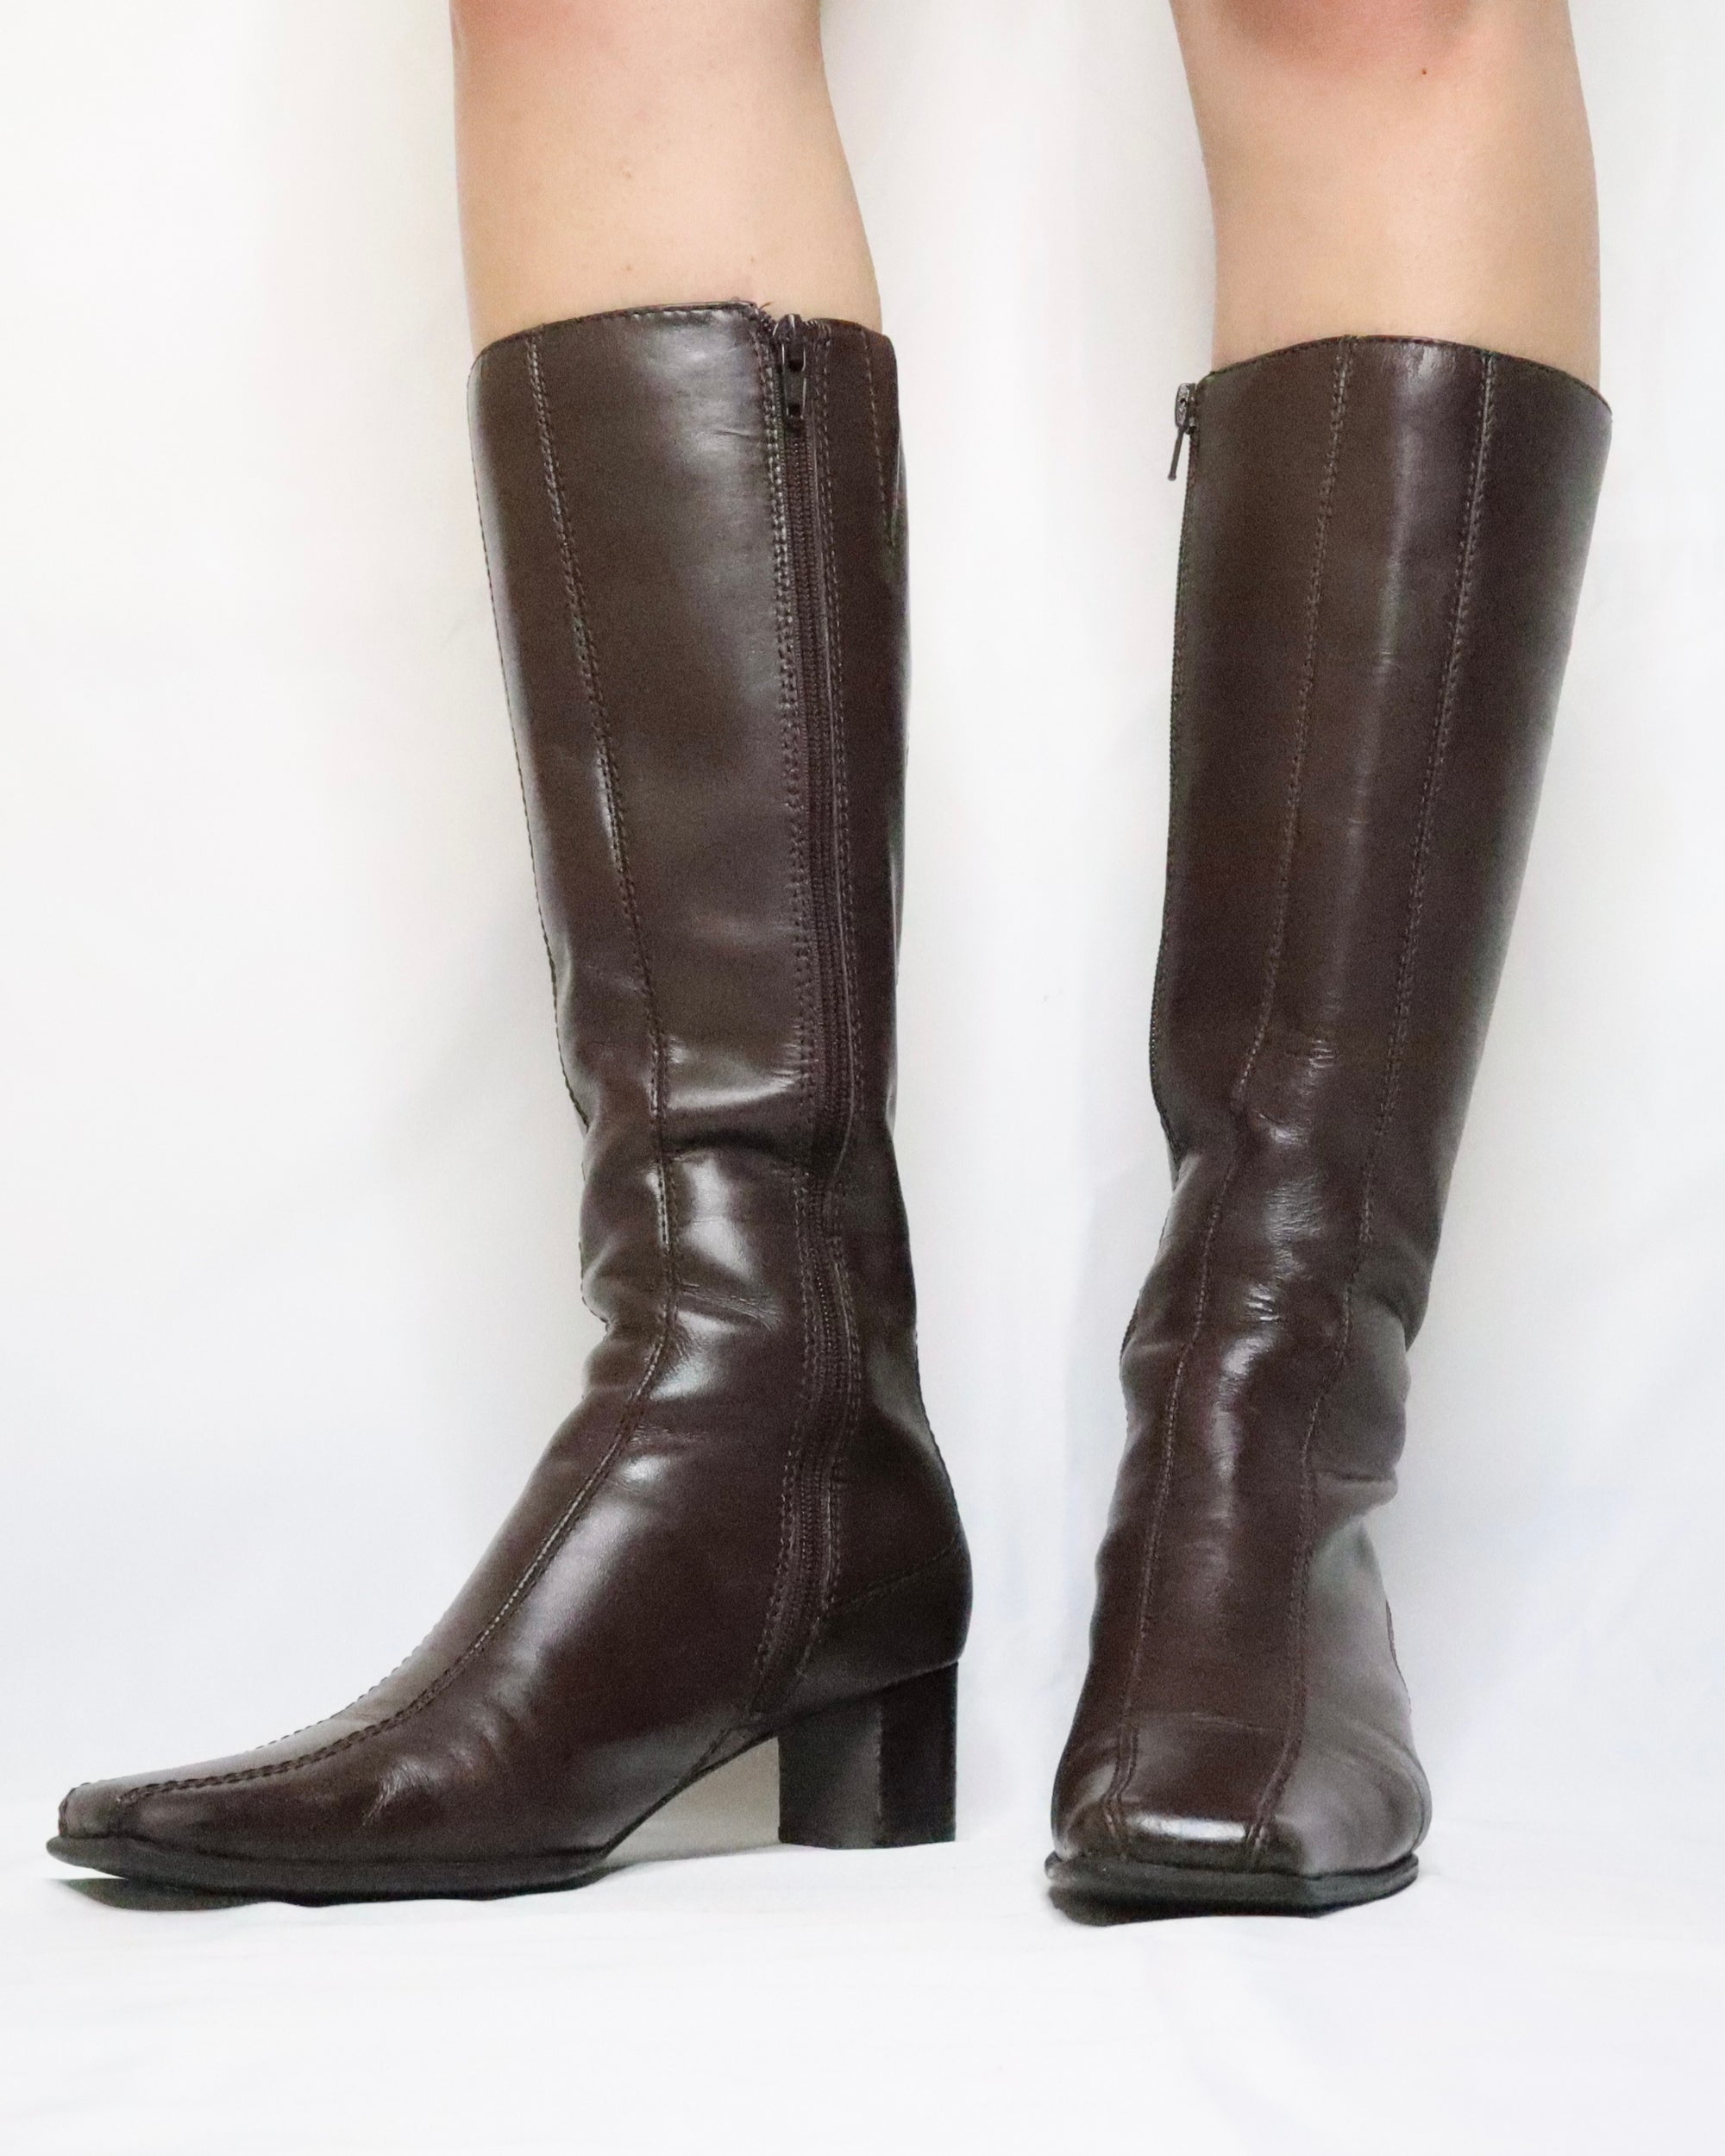 Brown Knee High Leather Boots (6.5 US) 